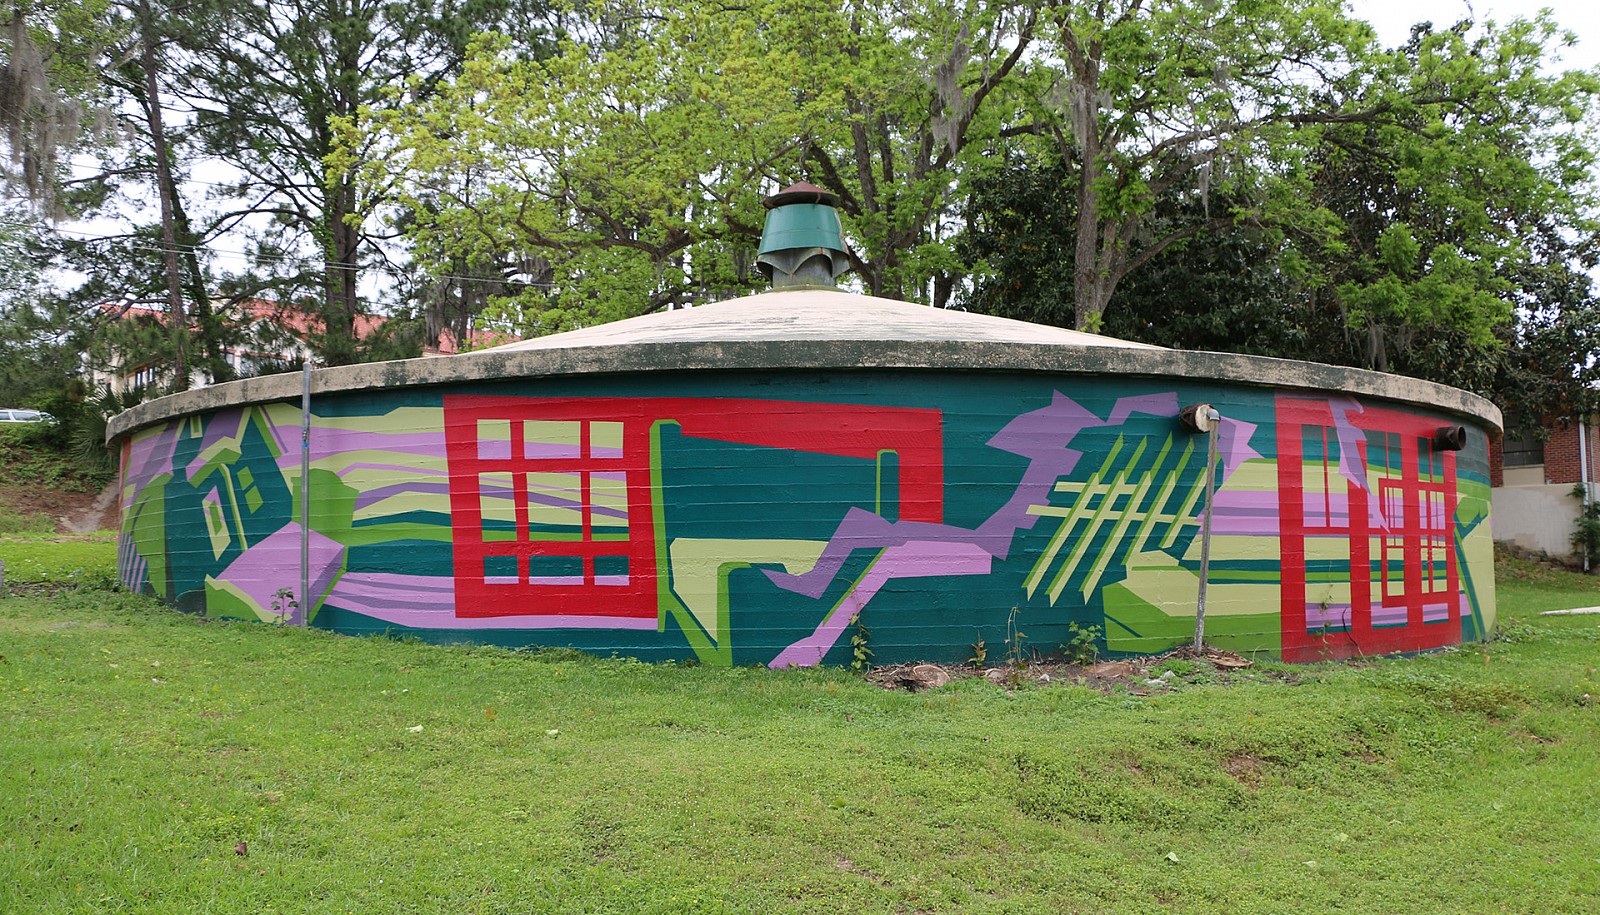 Joelle Dietrick
Systems + Circumstance, 2015
House paint on wall on Tallahassee's First Water Cistern, Tallahassee, Florida, 480 square feet